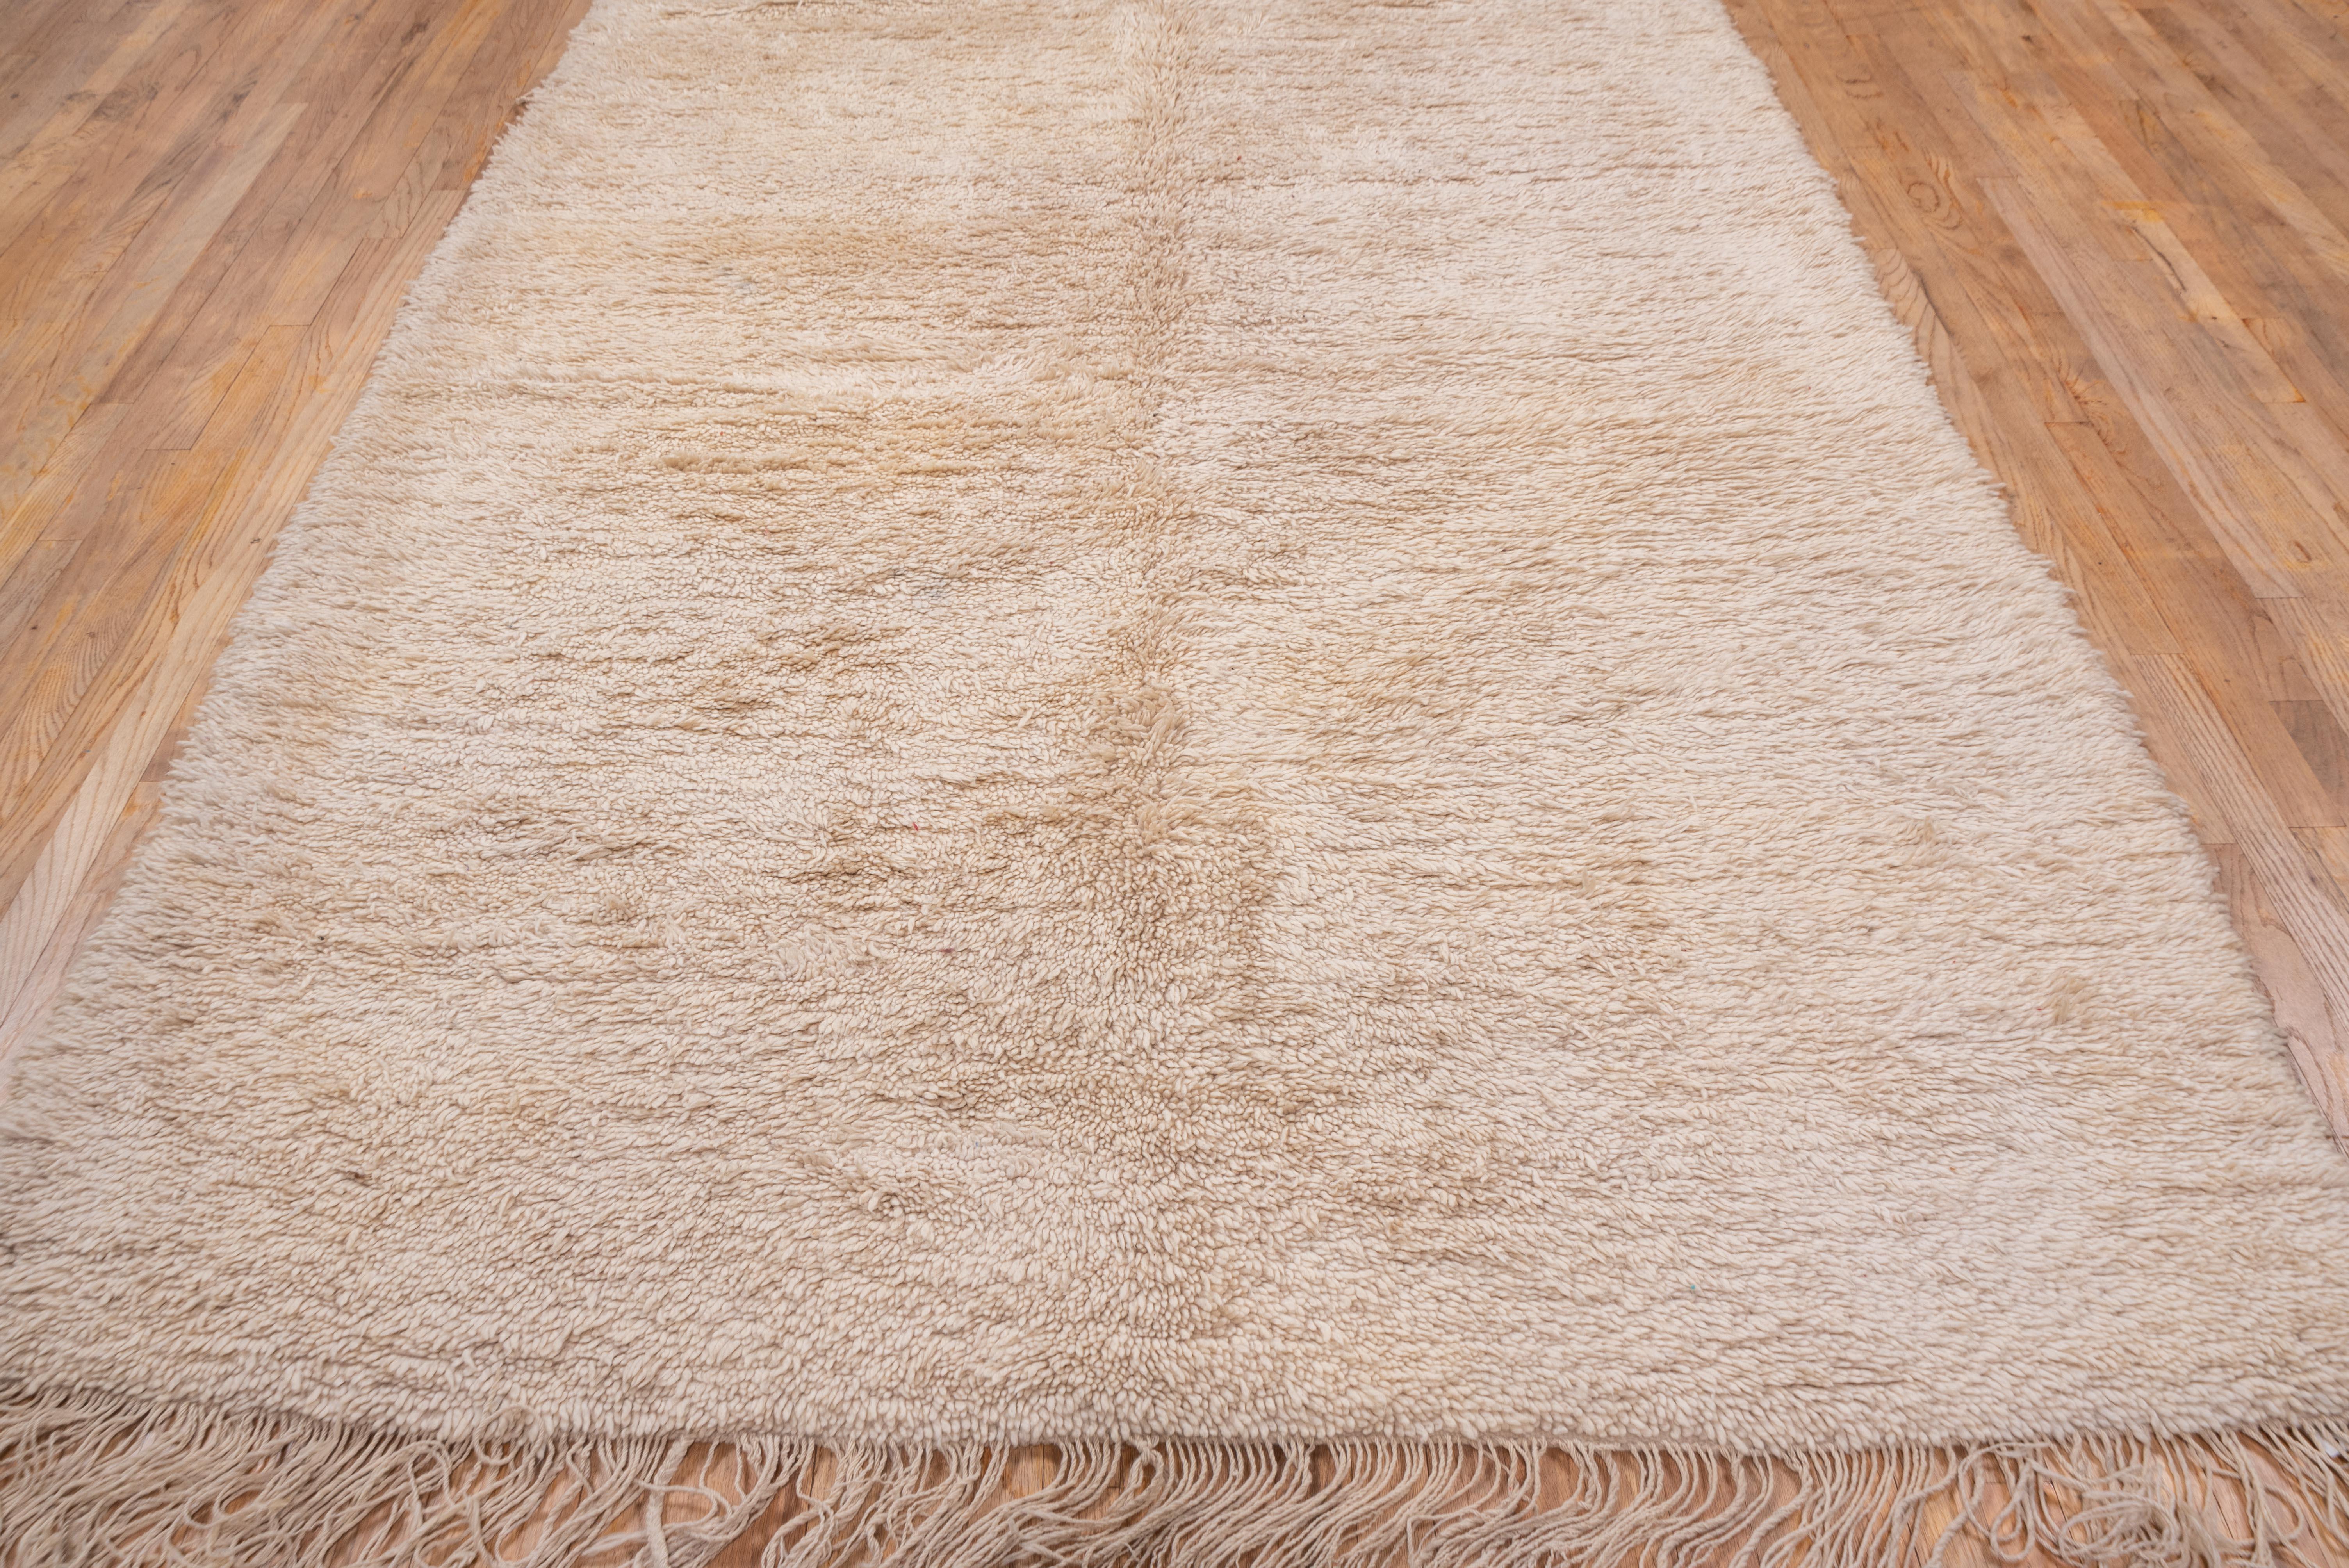 This medium pile, wool shag Moroccan rug is a simple addition to any room you place it in - with rich history, this hand knotted rug dates back to the late early 20th century 